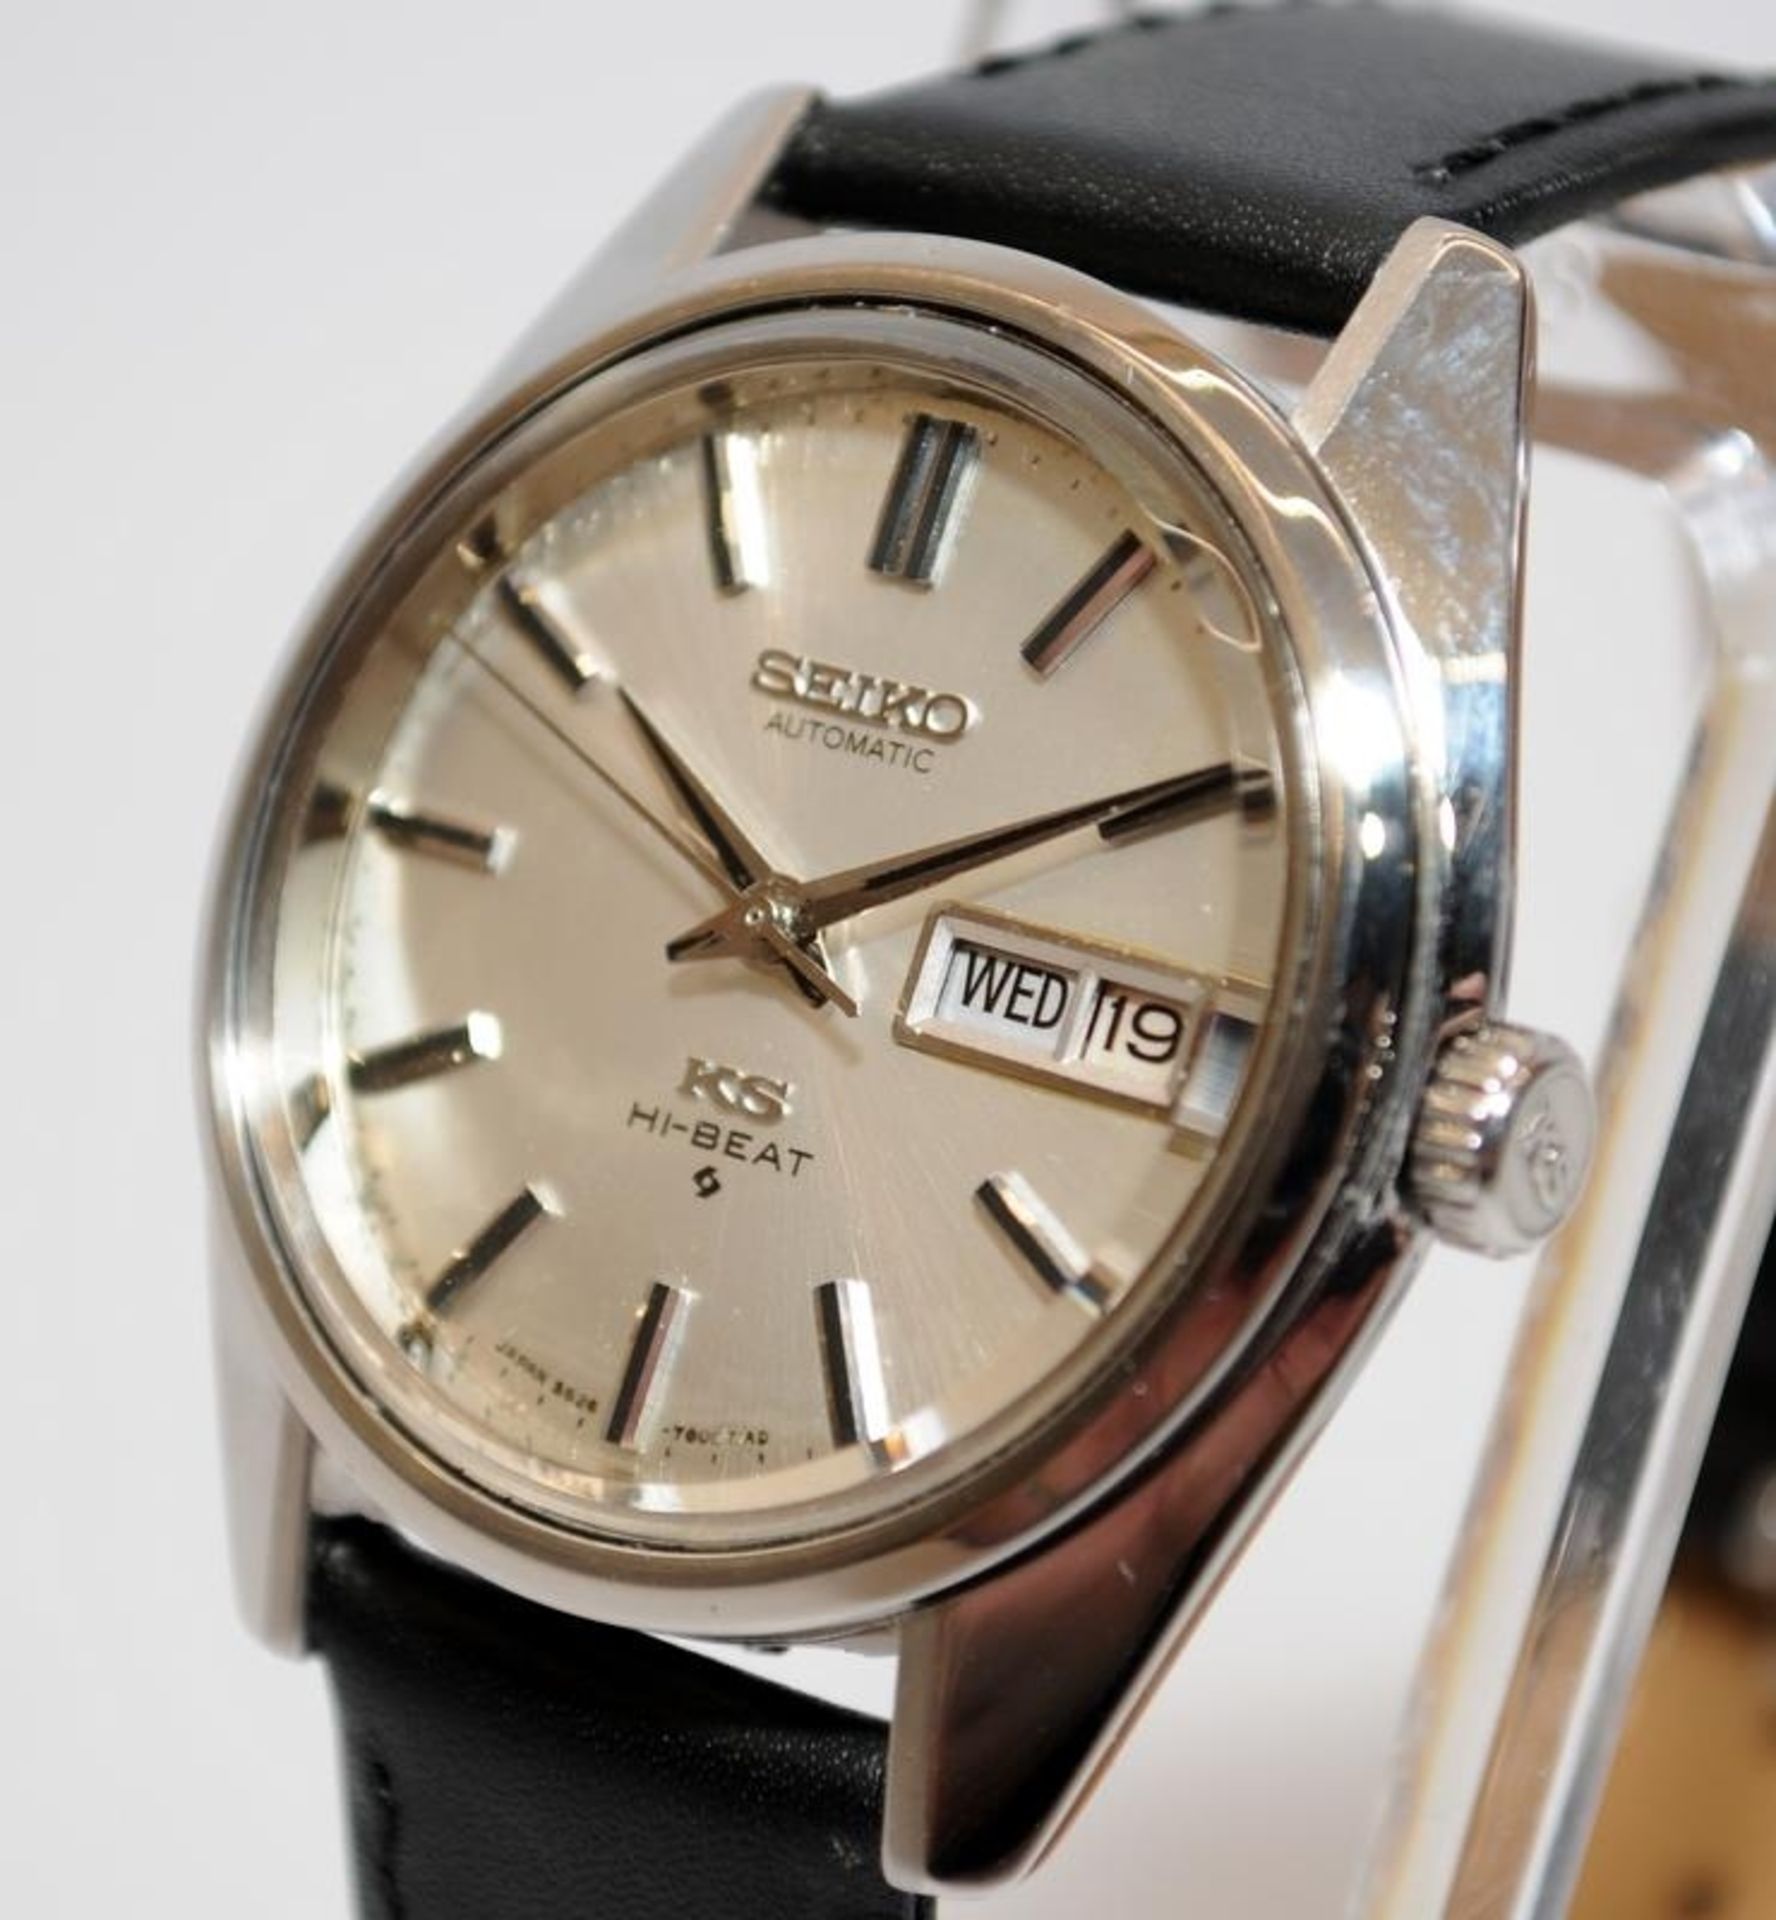 Vintage Suwa King Seiko gents automatic watch model ref 5626-7000, serial number dates this watch to